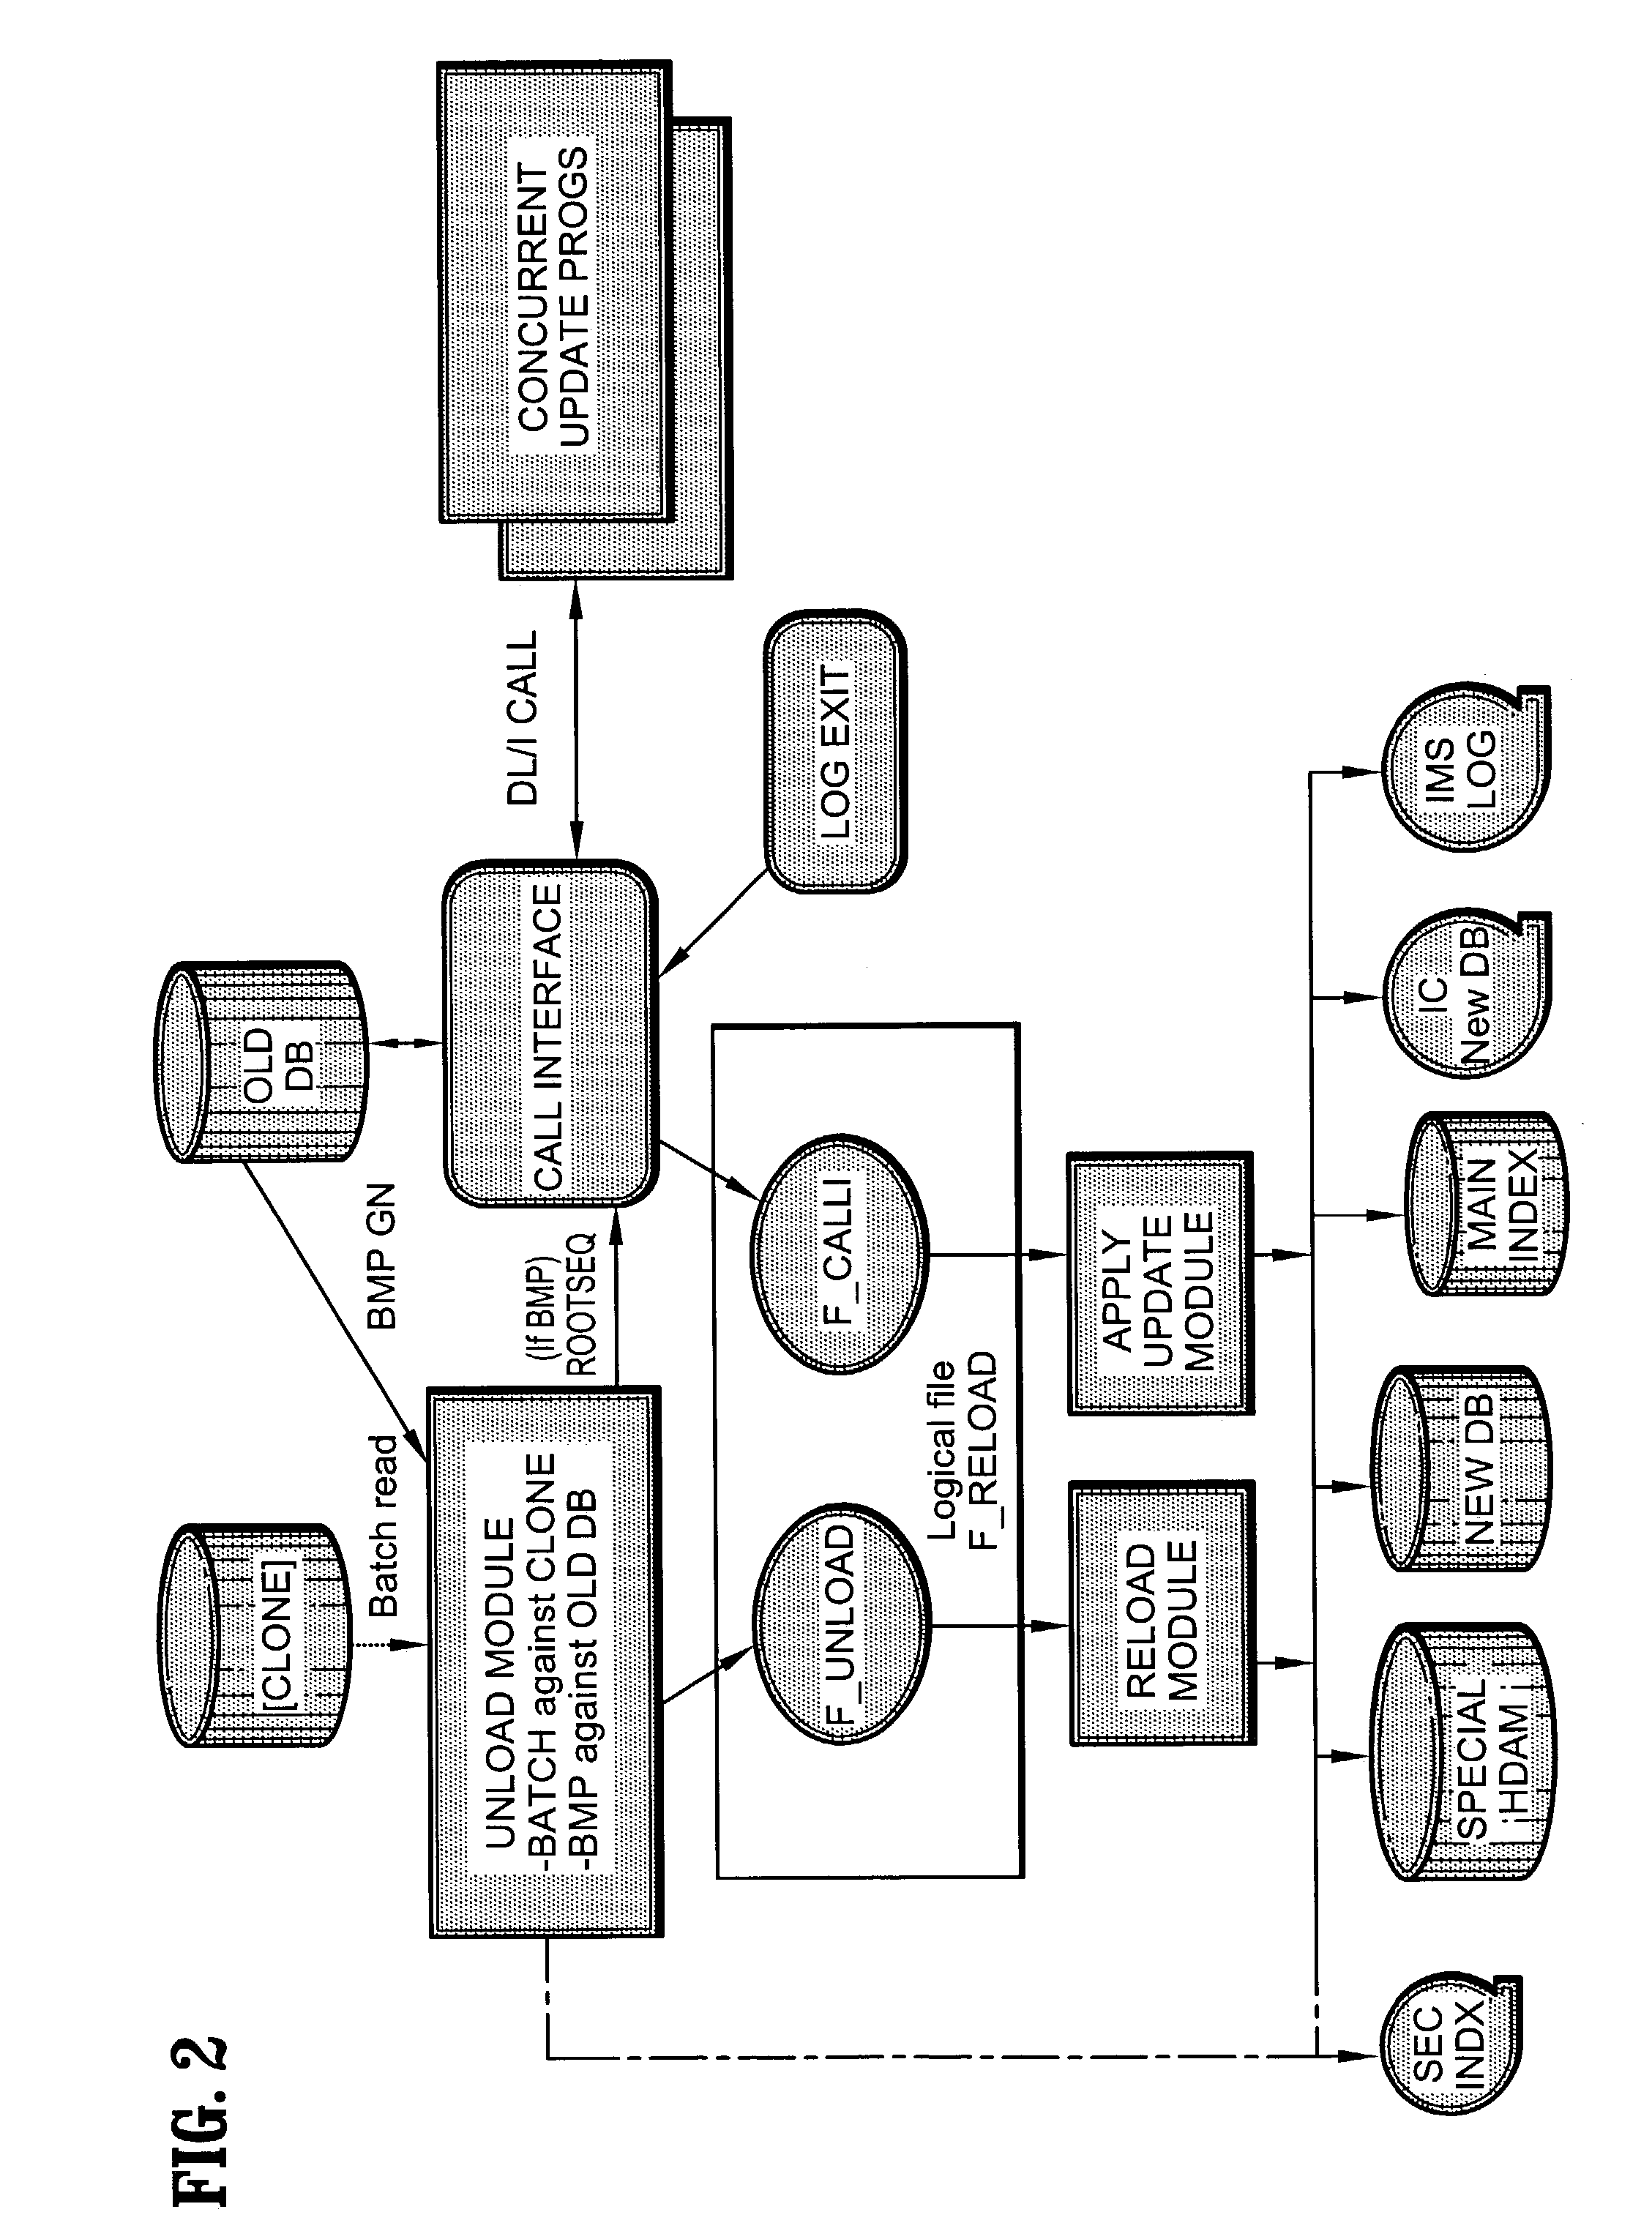 Method and system for online reorganization of databases